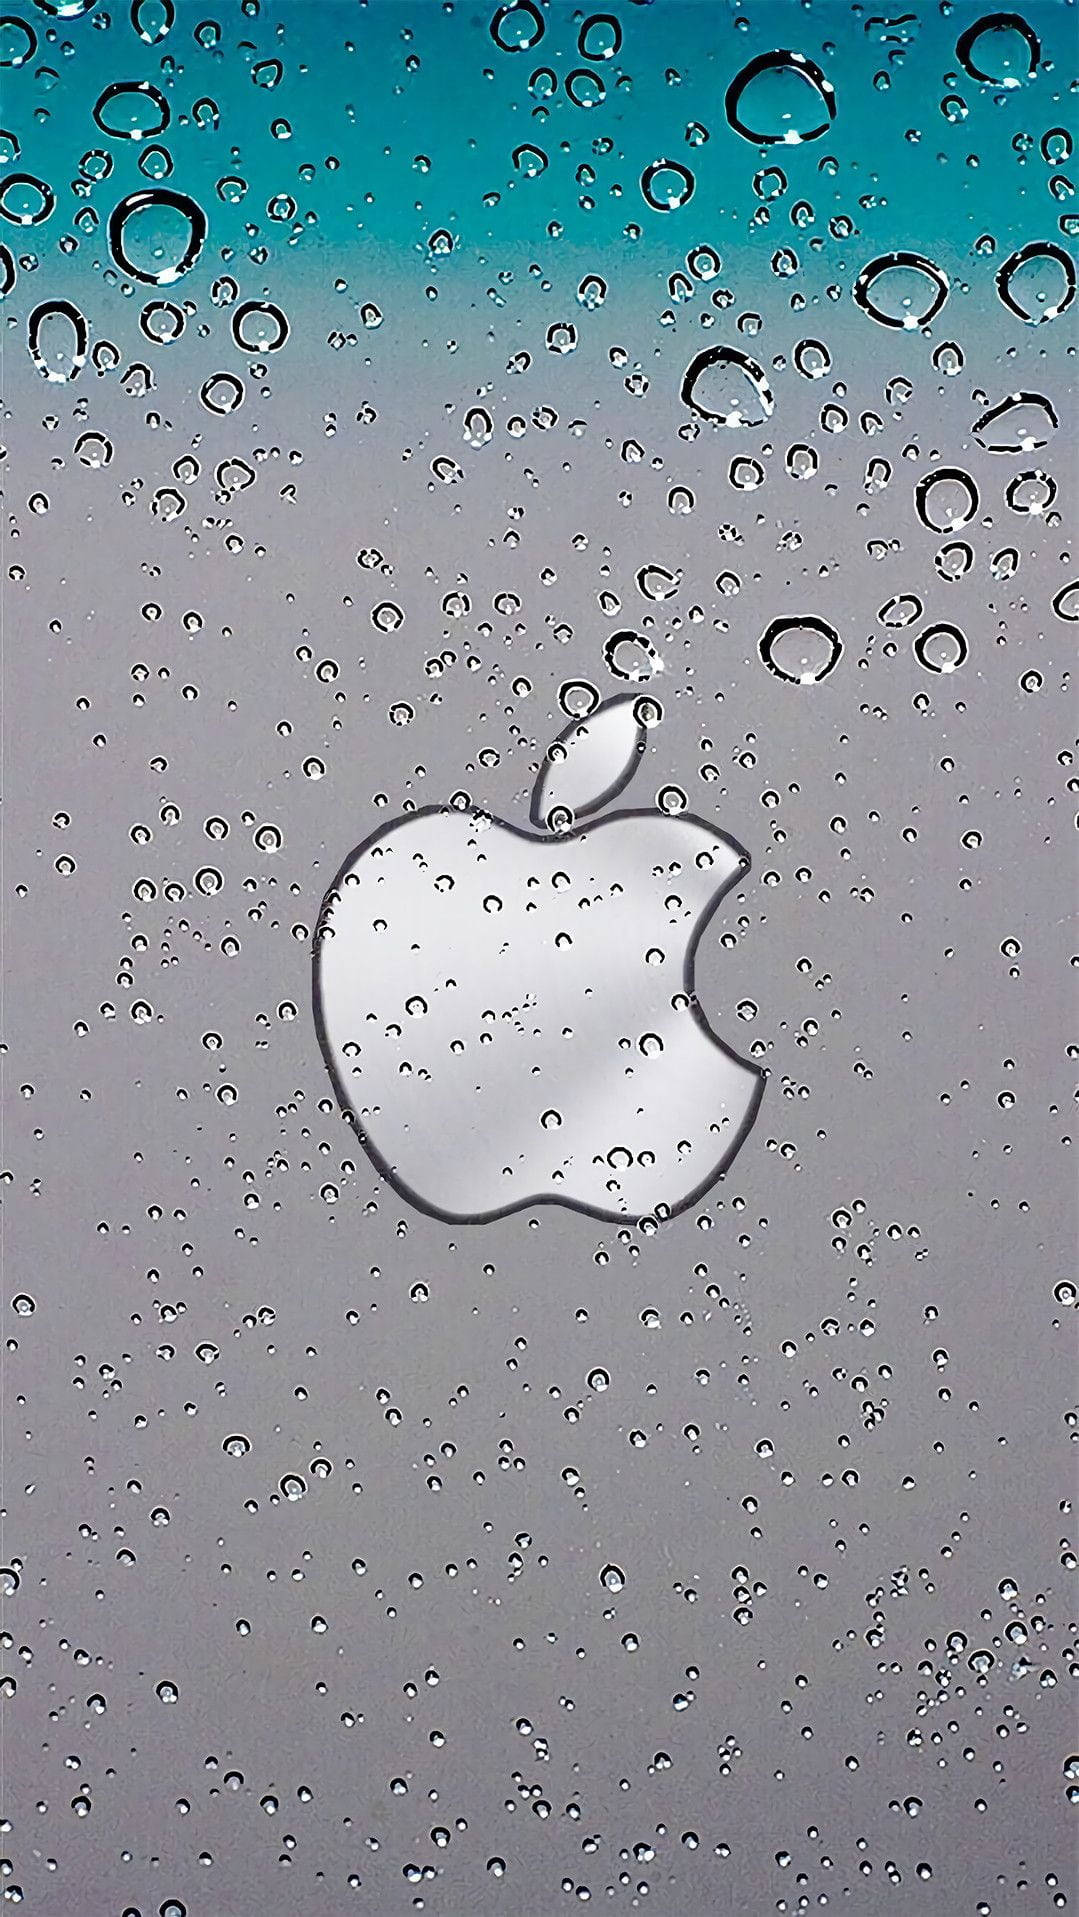 Full Hd Apple With Water Droplets Background